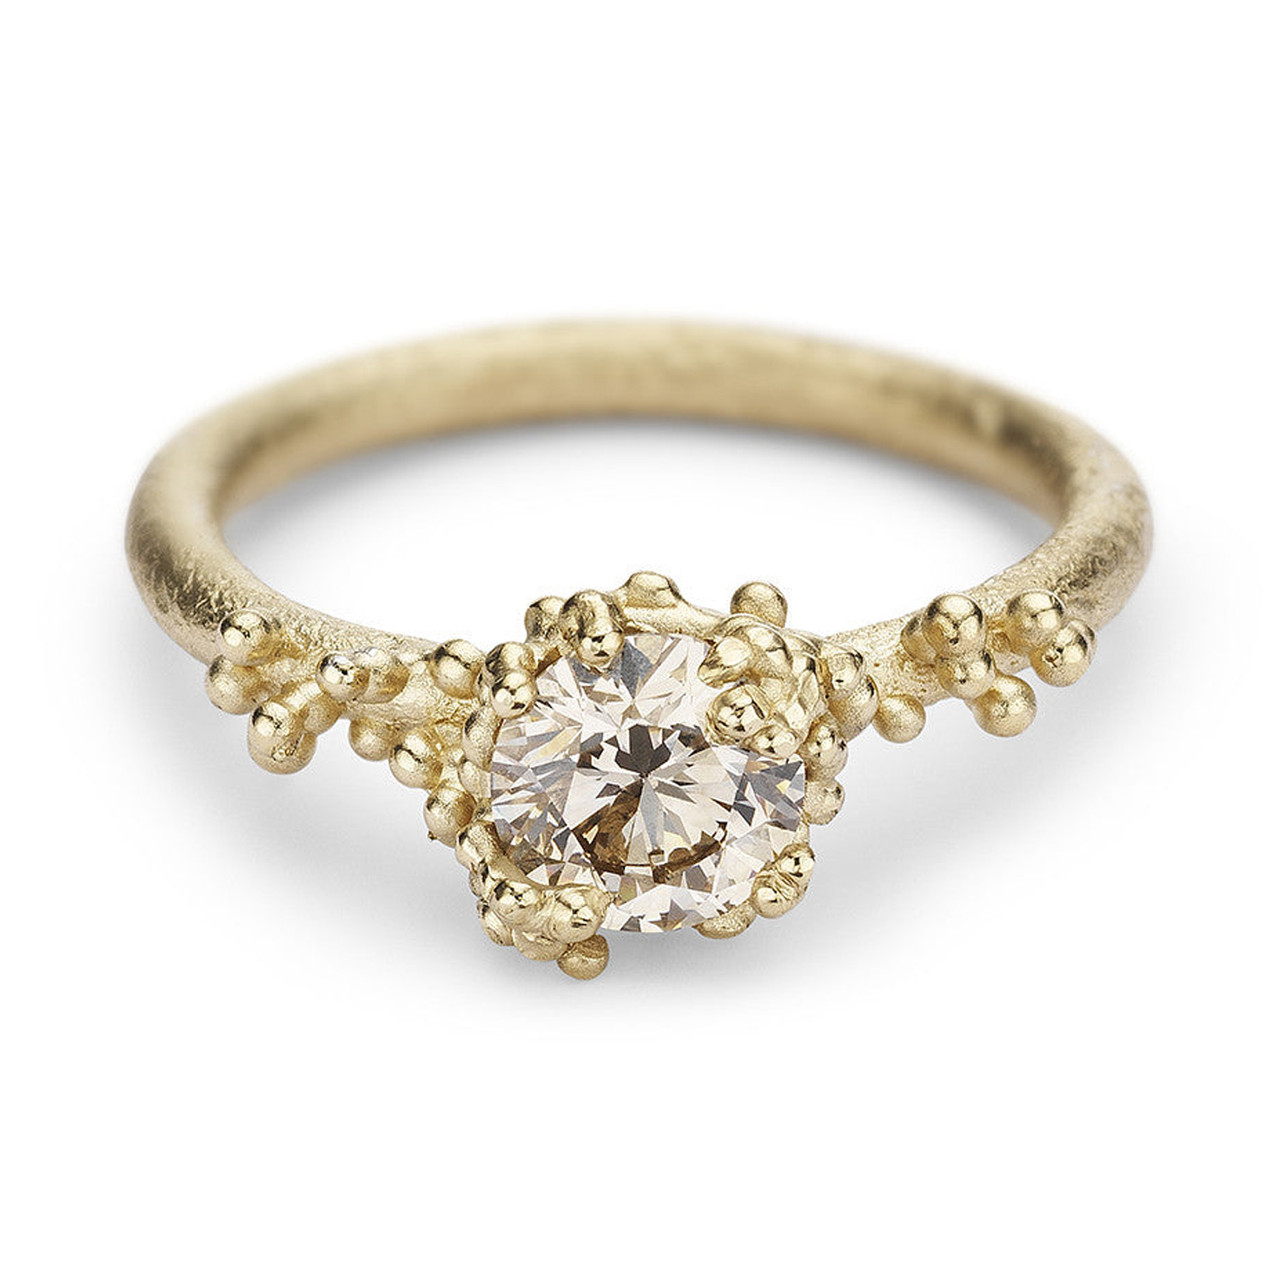 Solitaire Champagne Diamond Ring with Granules, Ruth Tomlinson, tomfoolery